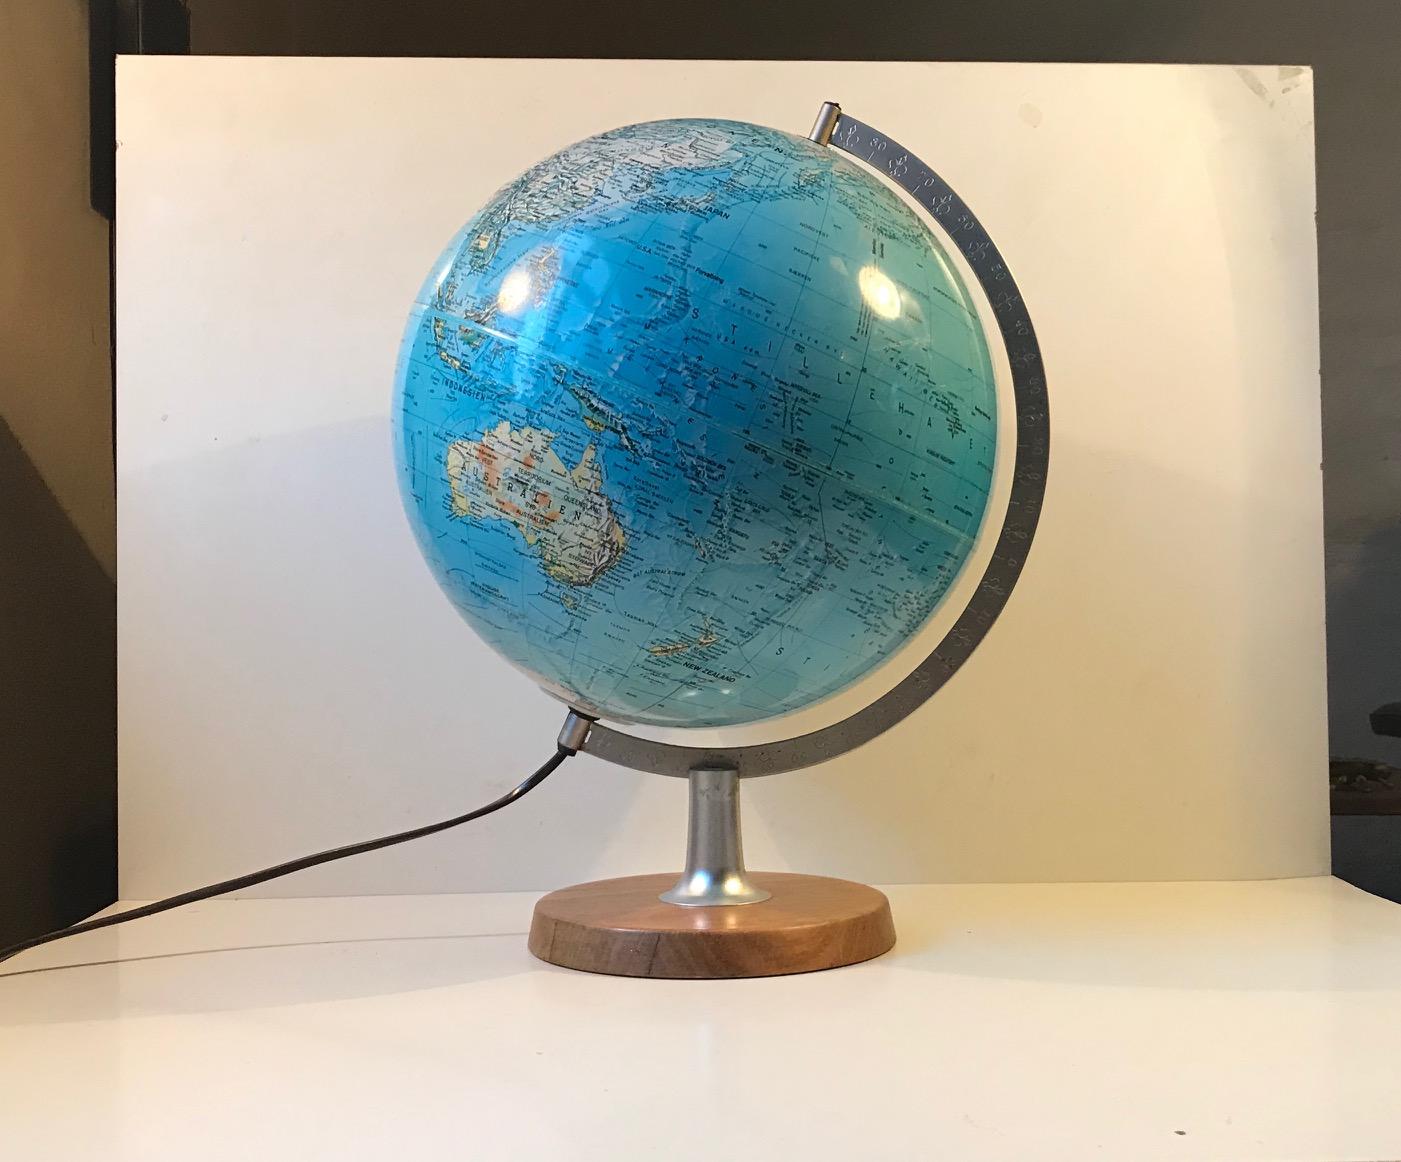 Professional illuminated Globus made from steel, solid teak and poly-resin. It was manufactured and designed by Scan-Globe in Denmark during the 1970s. It has a 40 watts light bulb and it serves as a table light as well. Although countries are